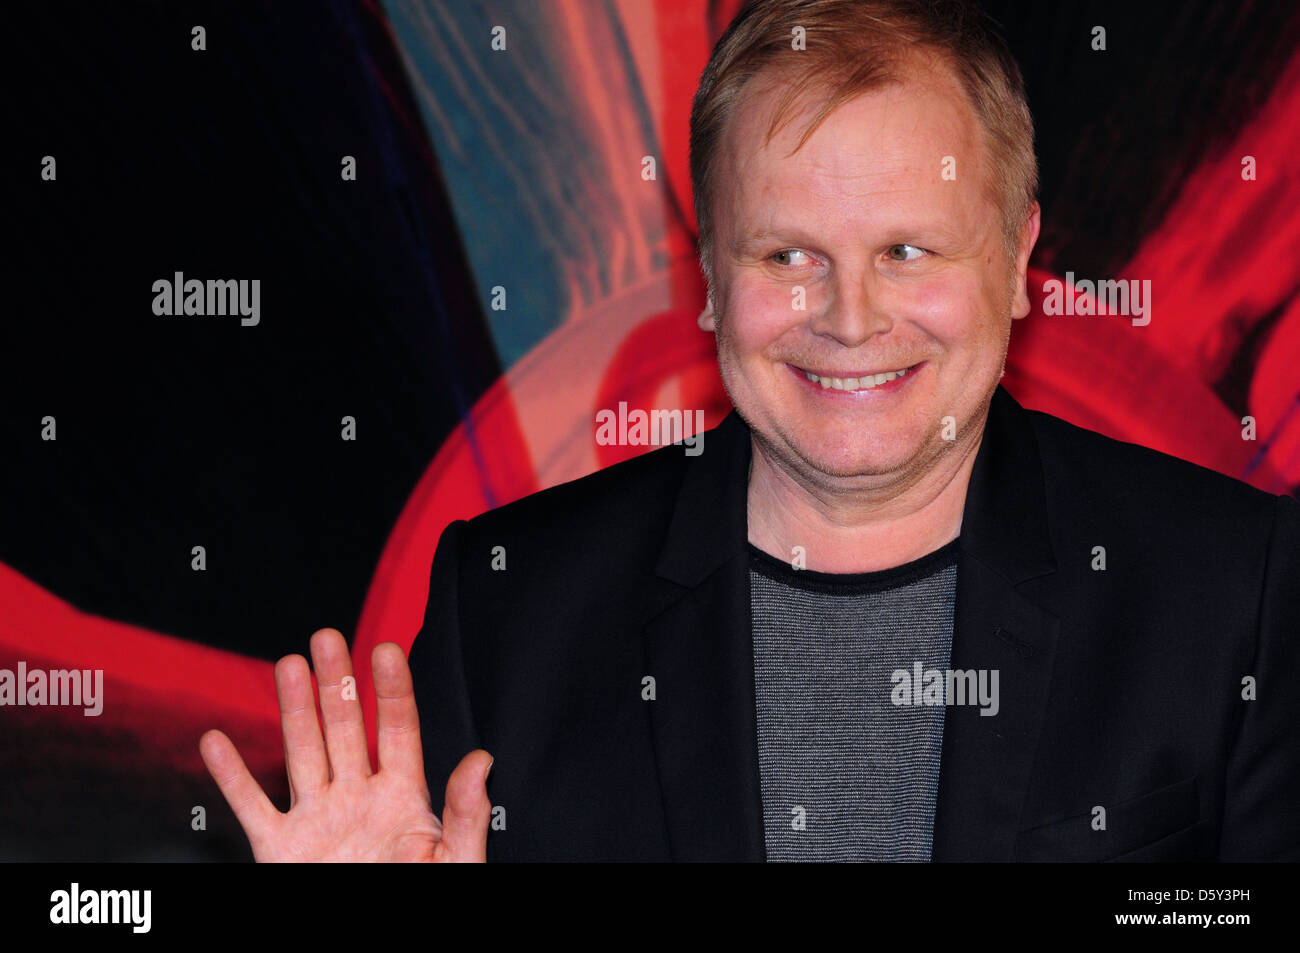 Herbert Groenemeyer at a press conference and photo call to promote his new album 'Schiffsverkehr' at Haus der Kulturen. Stock Photo